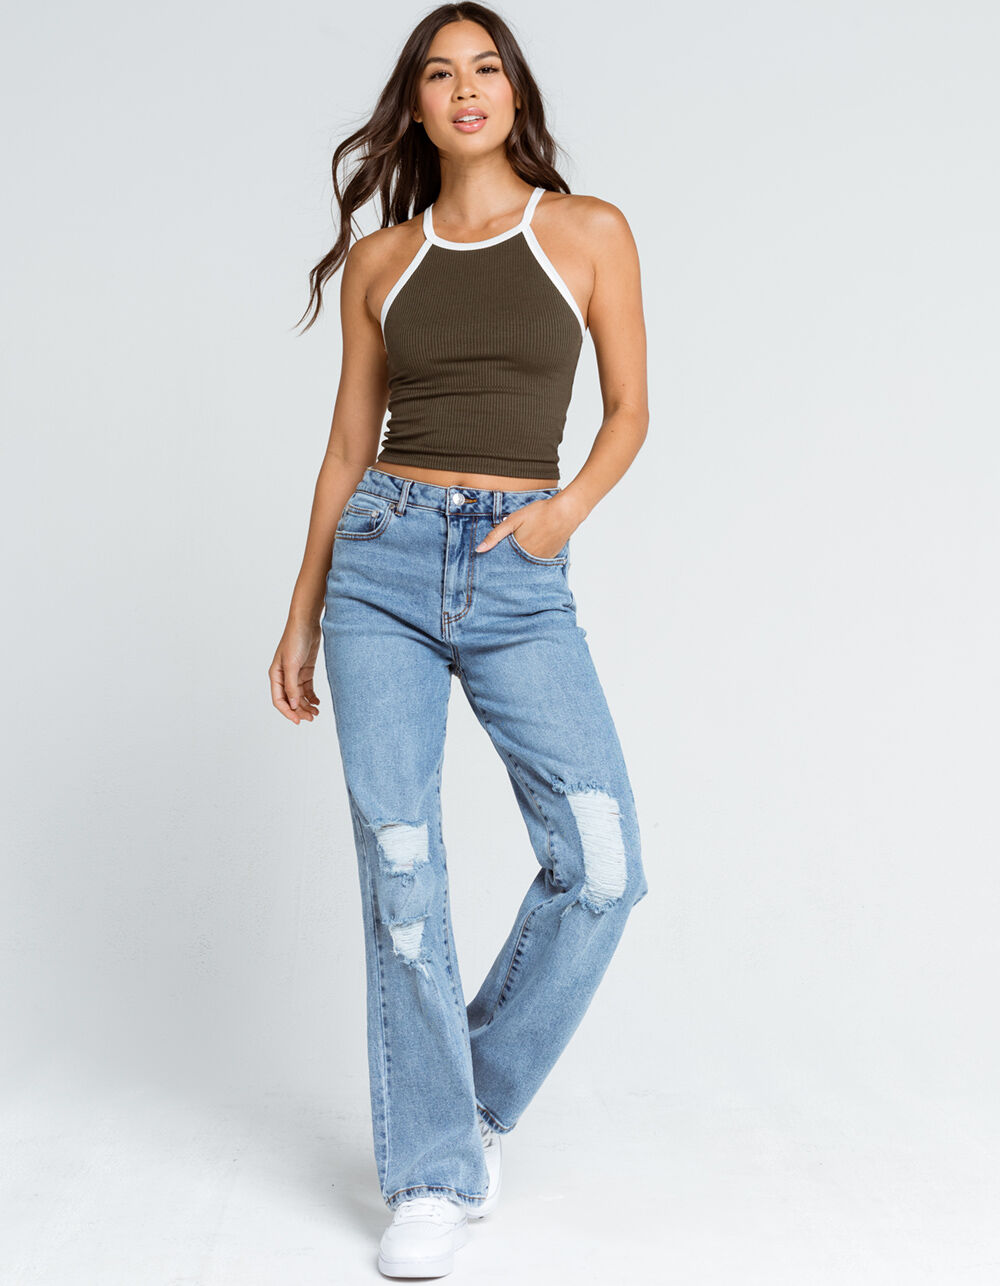 ALMOST FAMOUS Womens 90s Jeans - STONE WASH | Tillys